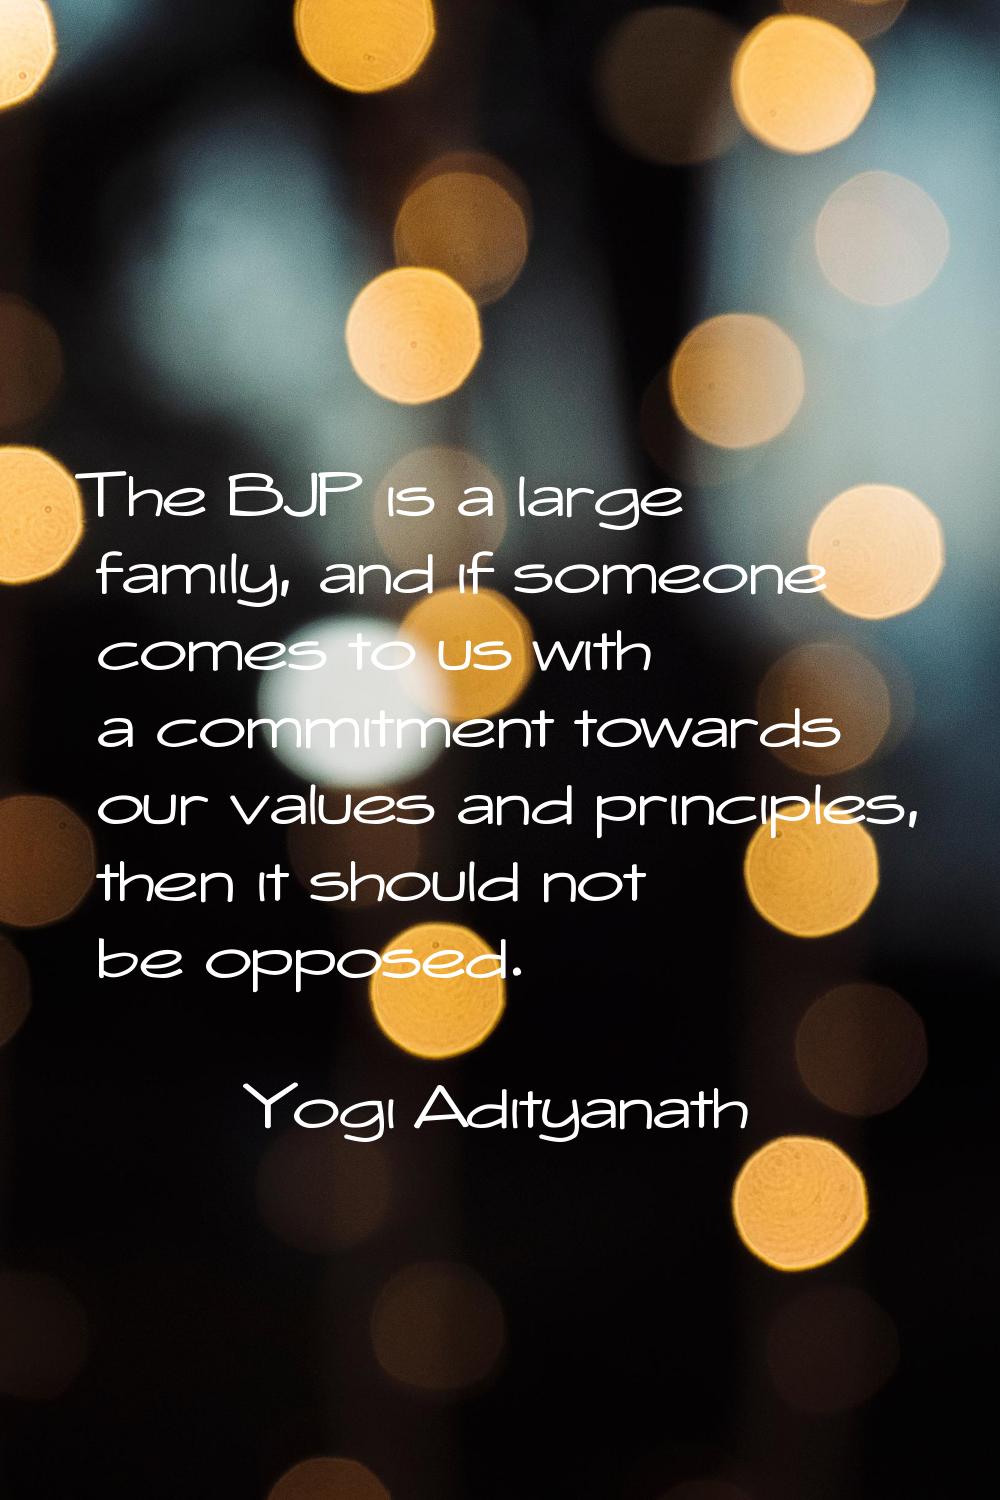 The BJP is a large family, and if someone comes to us with a commitment towards our values and prin